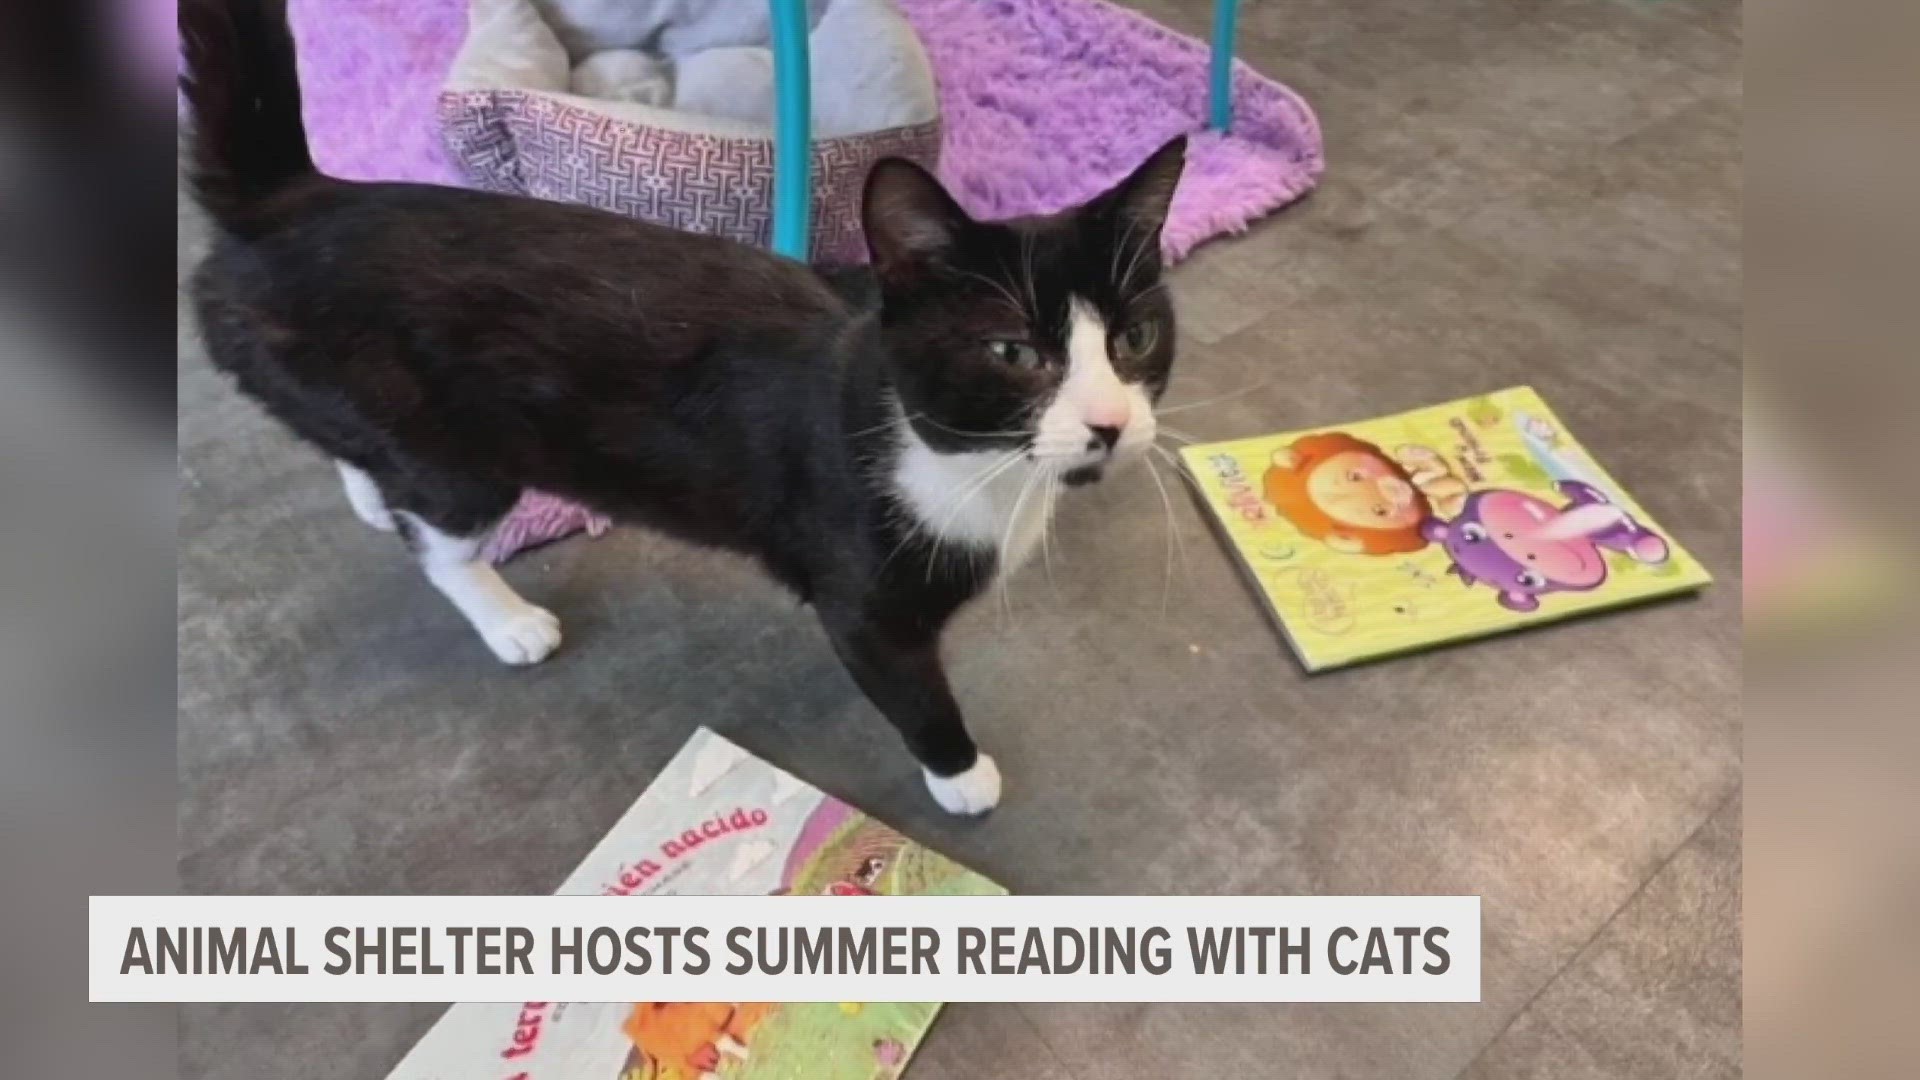 Shelter staff say it's a great opportunity for kids to keep up on their reading skills. Plus, it helps socialize the cats and educate kids about pet adoption.